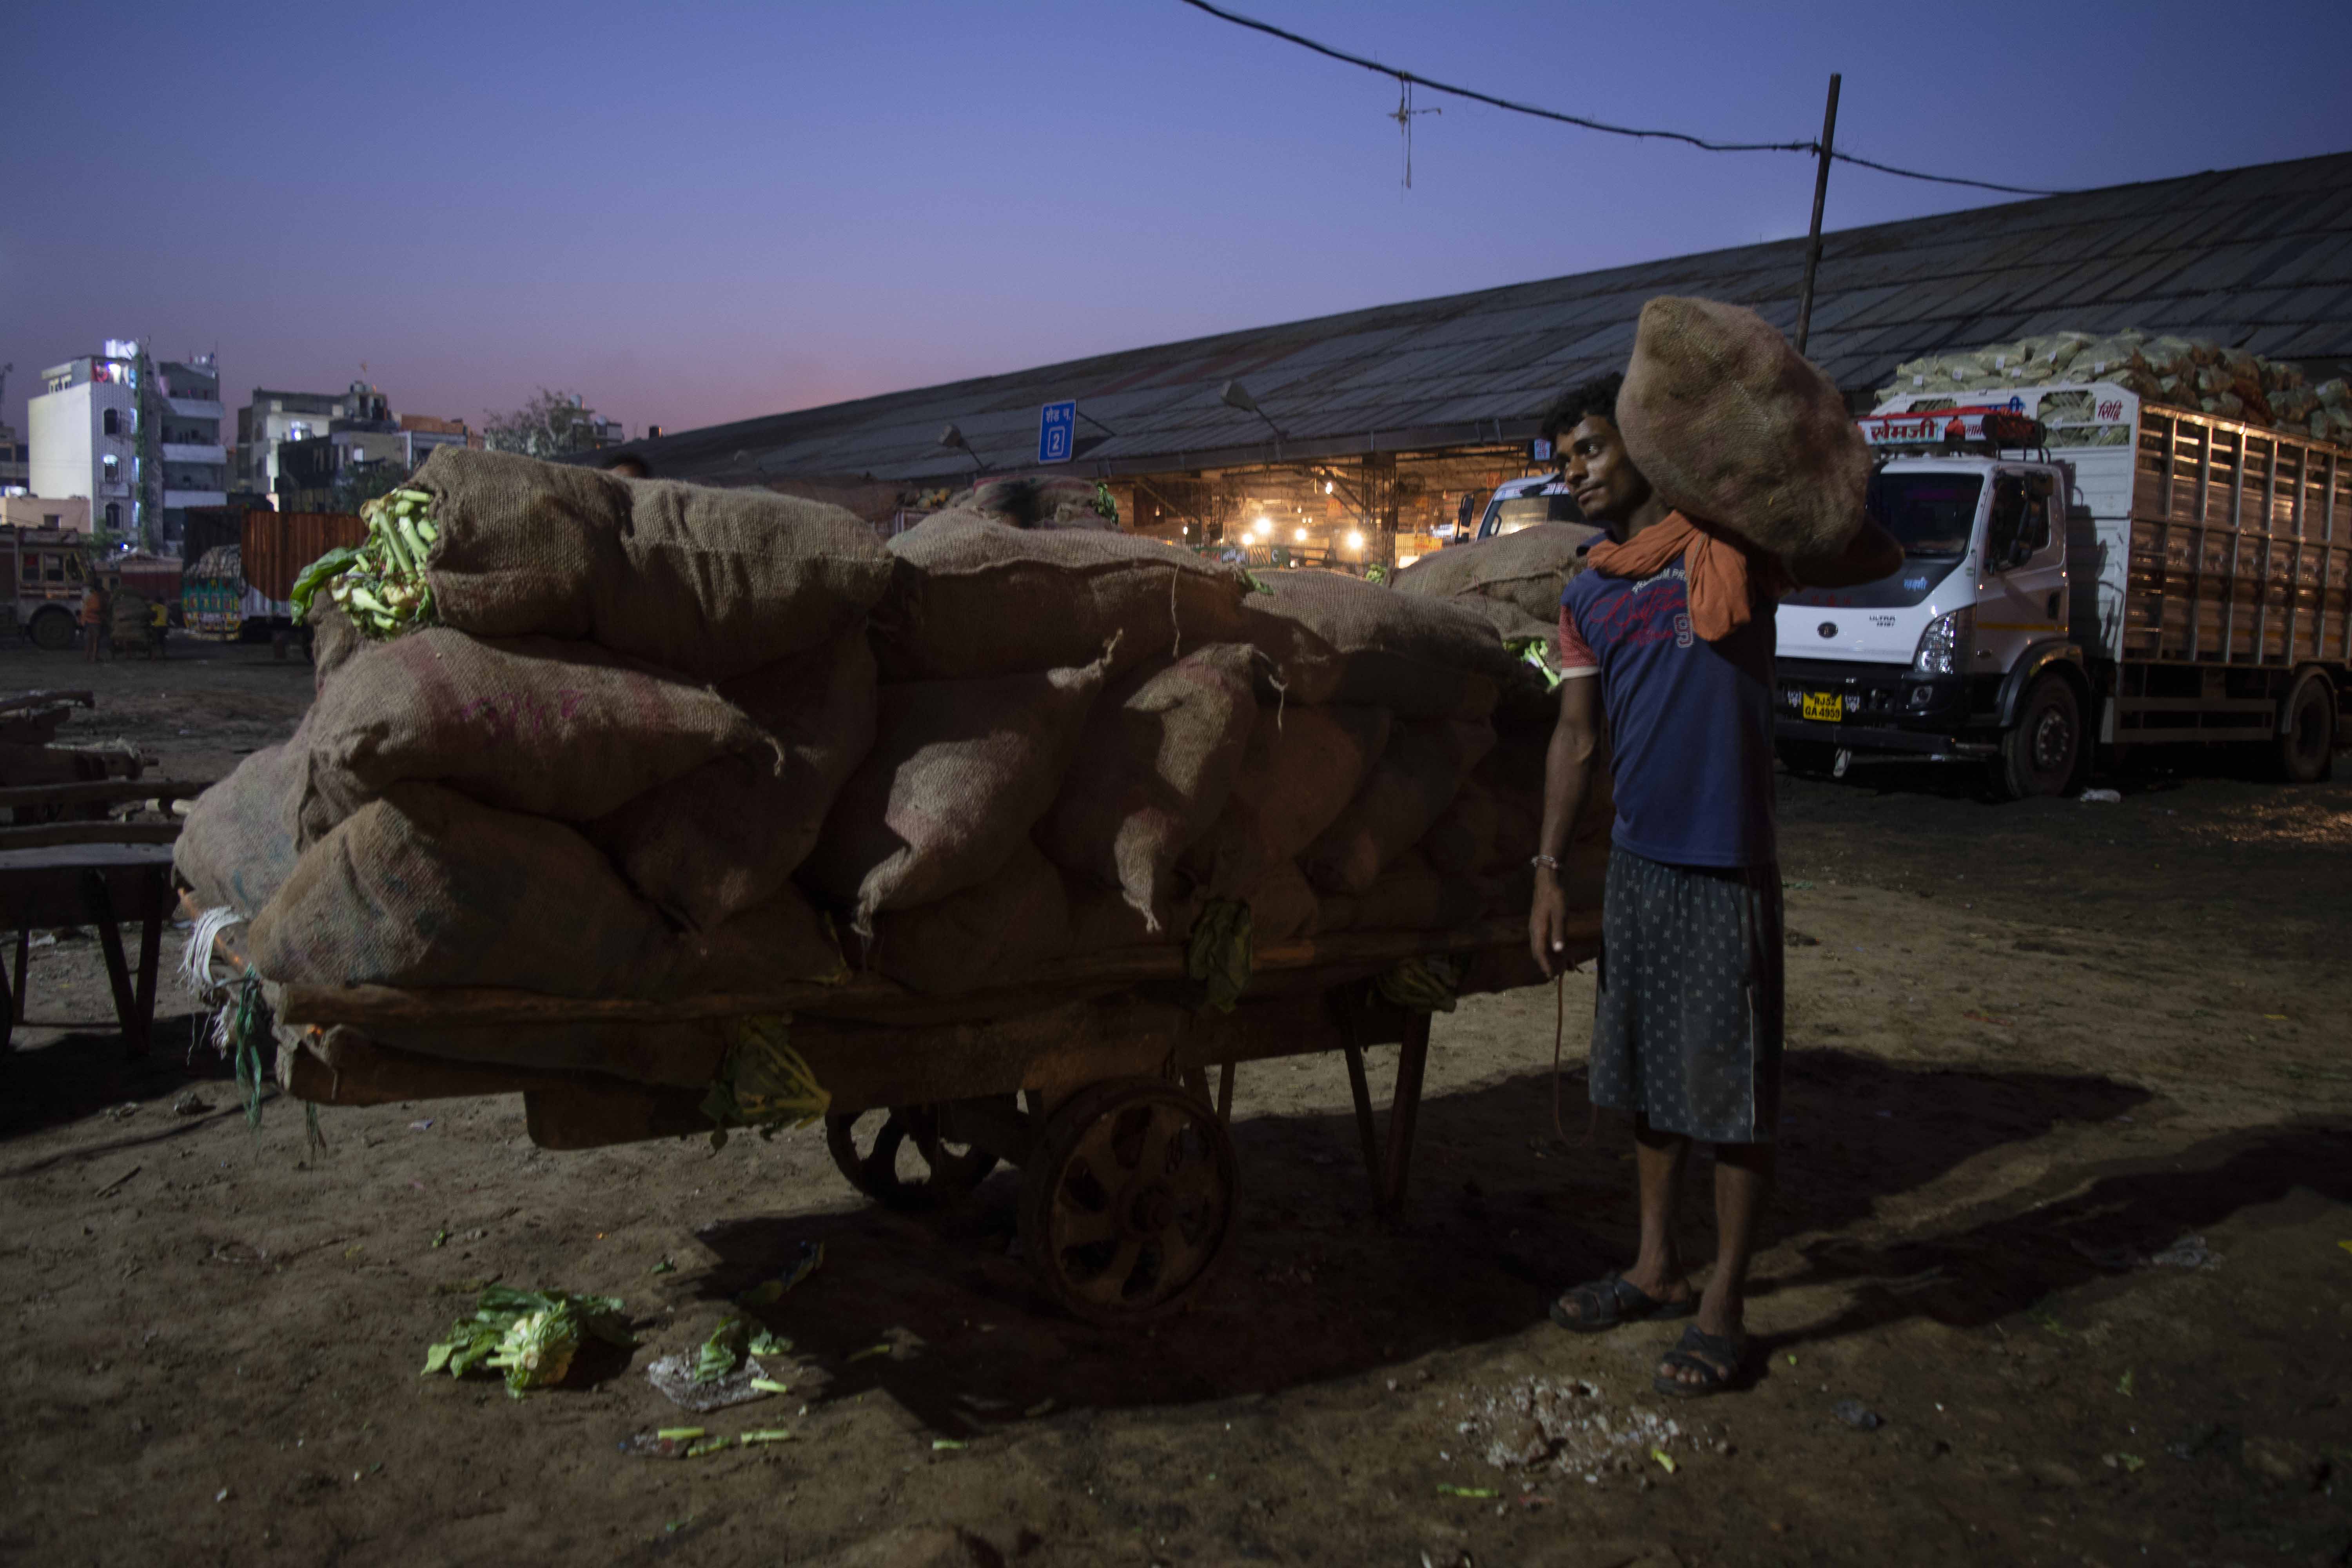 The daily wager, loading the cart with the sacks of cauliflower vegetable in order to transport from one place to another.